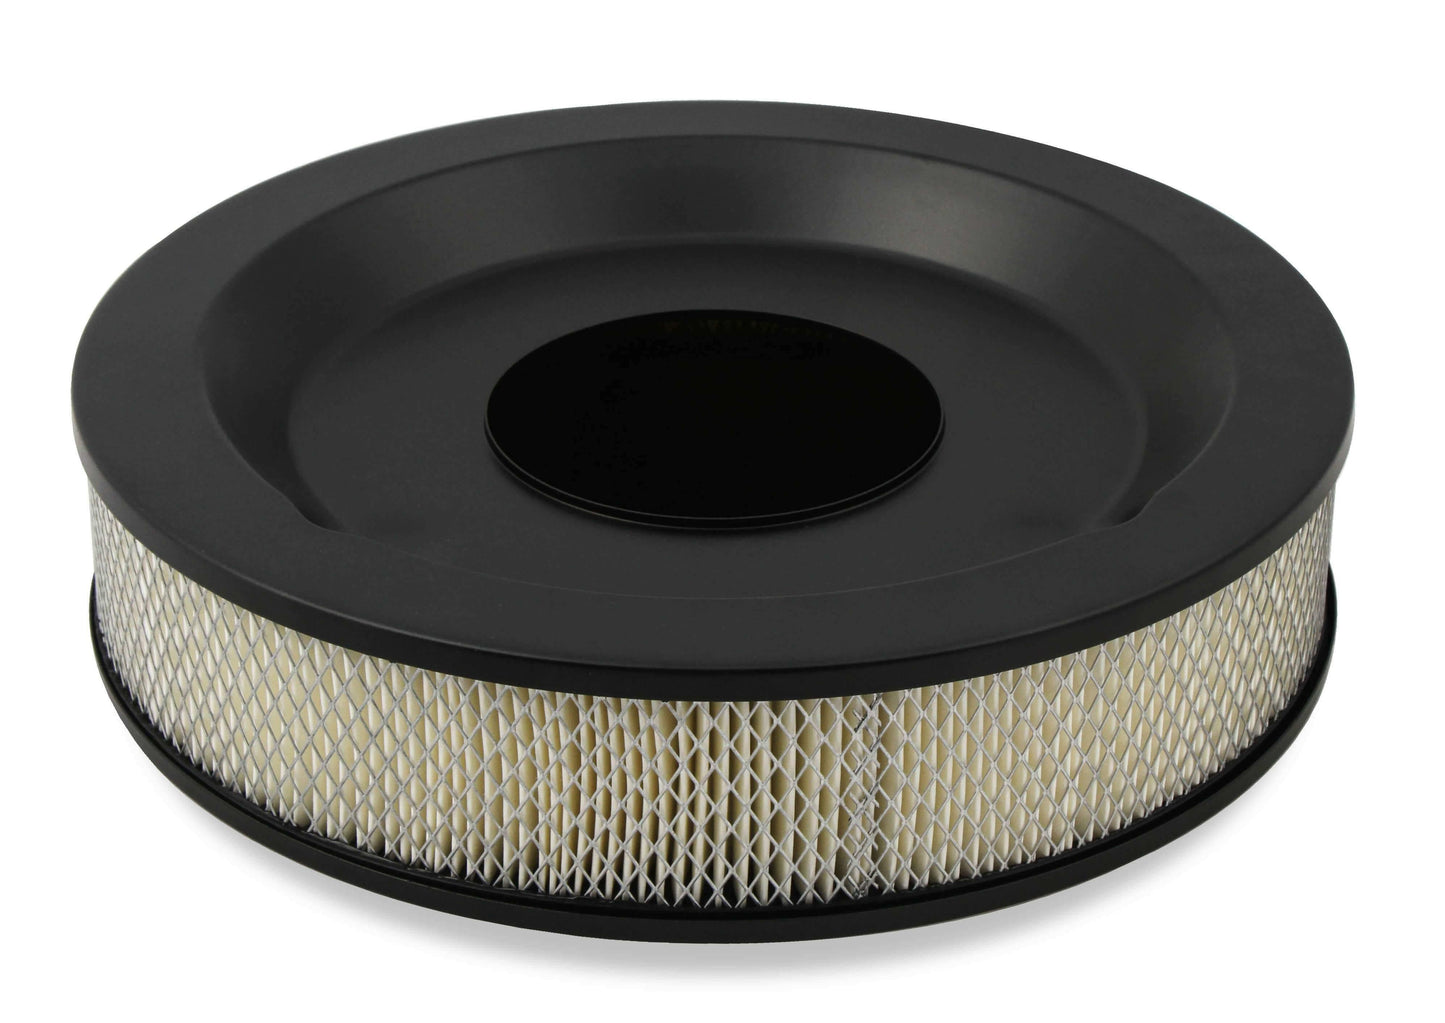 Sniper Air Cleaner Assembly, 14 x 4 - Black Finish - 120-541